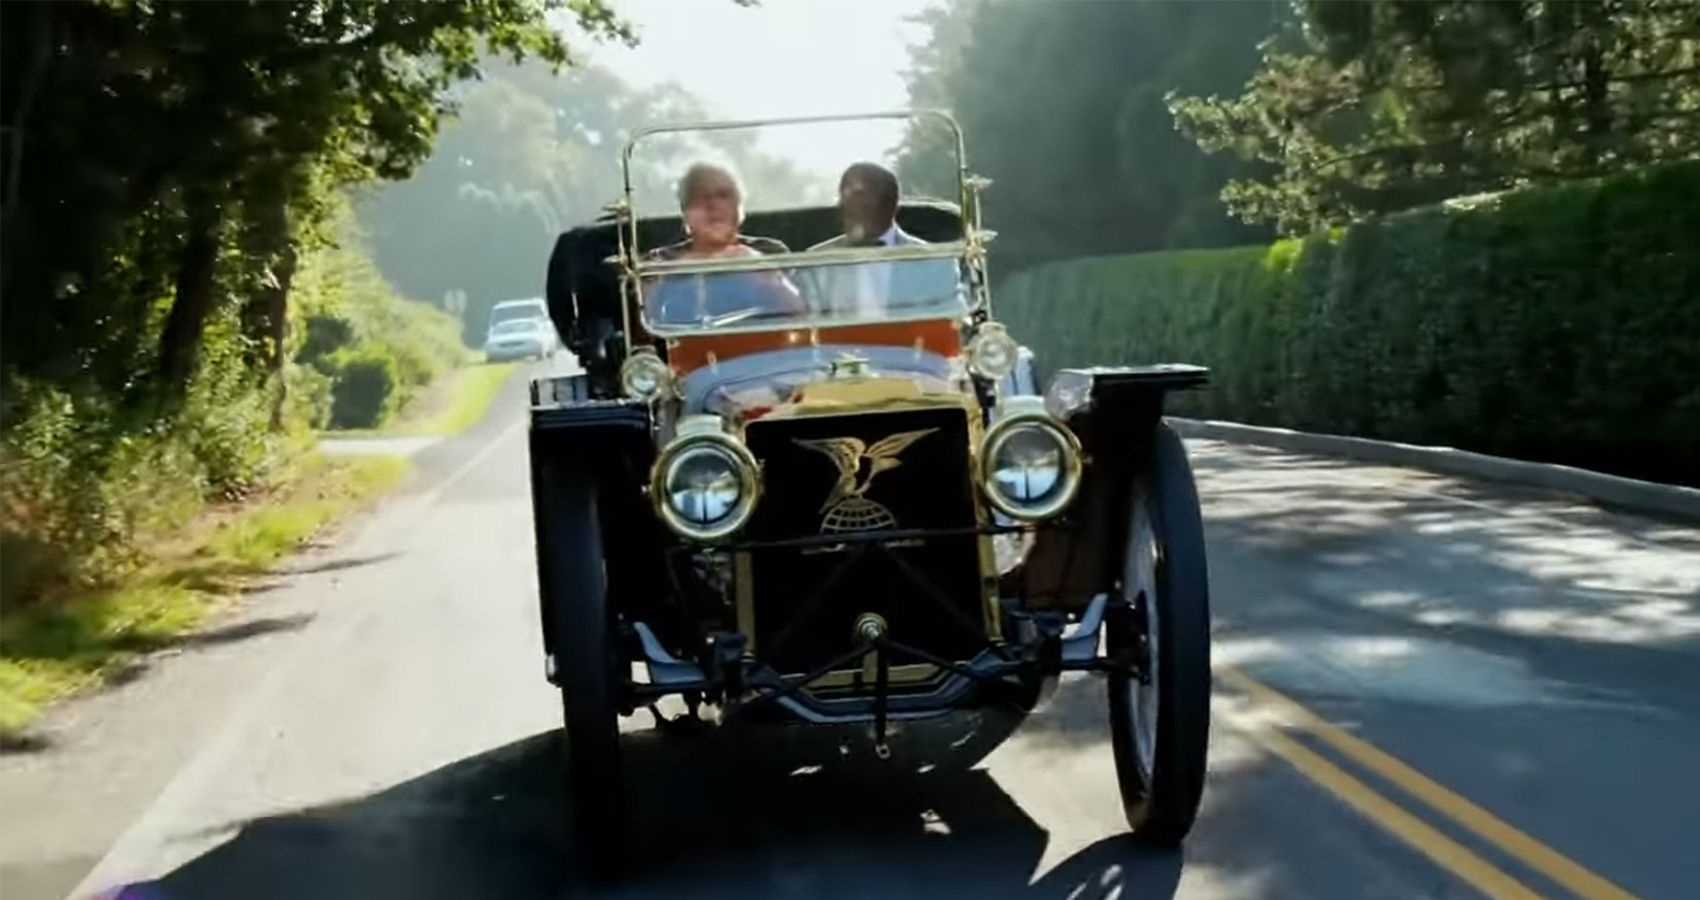 Jay Leno At The Wheel the 1910 American Underslung 